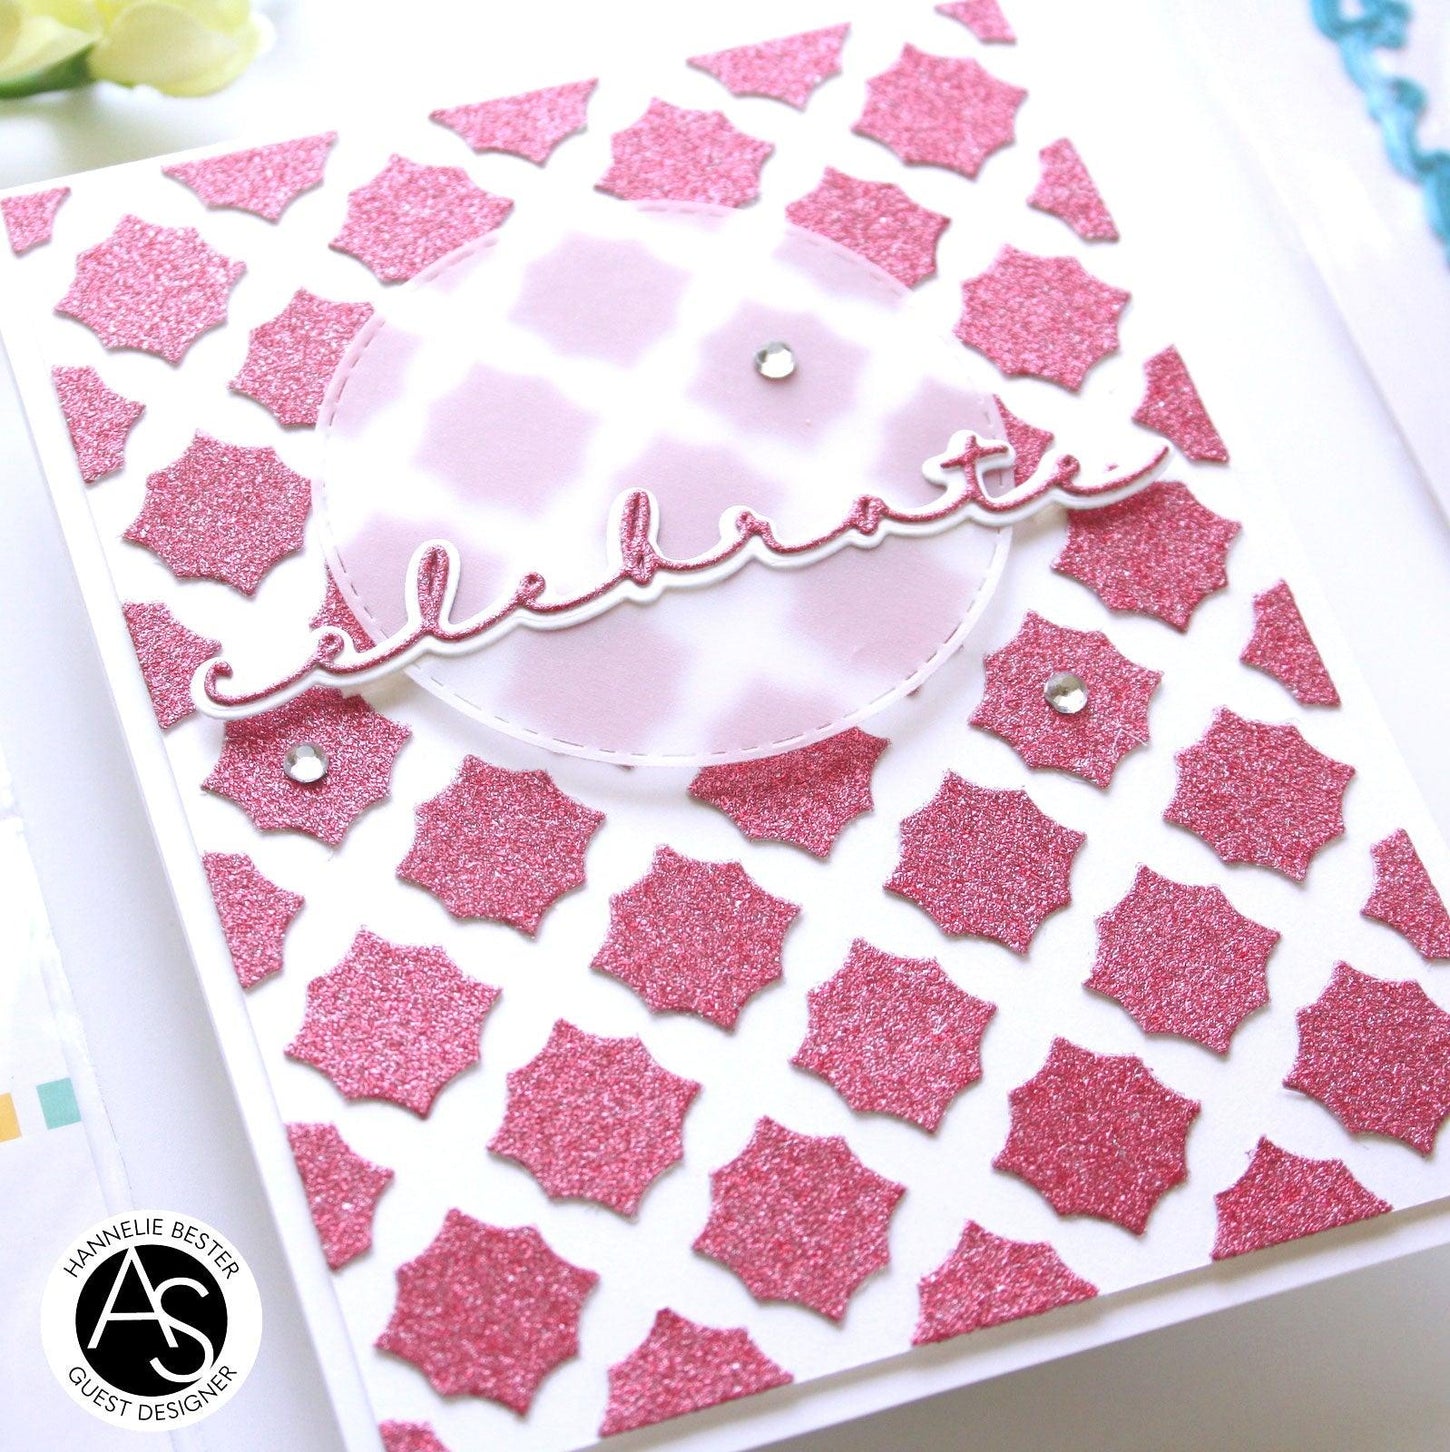 floral-lattice-stencil-cardmaking-ideas-alex-syberia-designs-hand-made-cards-stamps-A2-cover-die-coloring-carmaking-shop-beautiful-stamps-celebrate-die